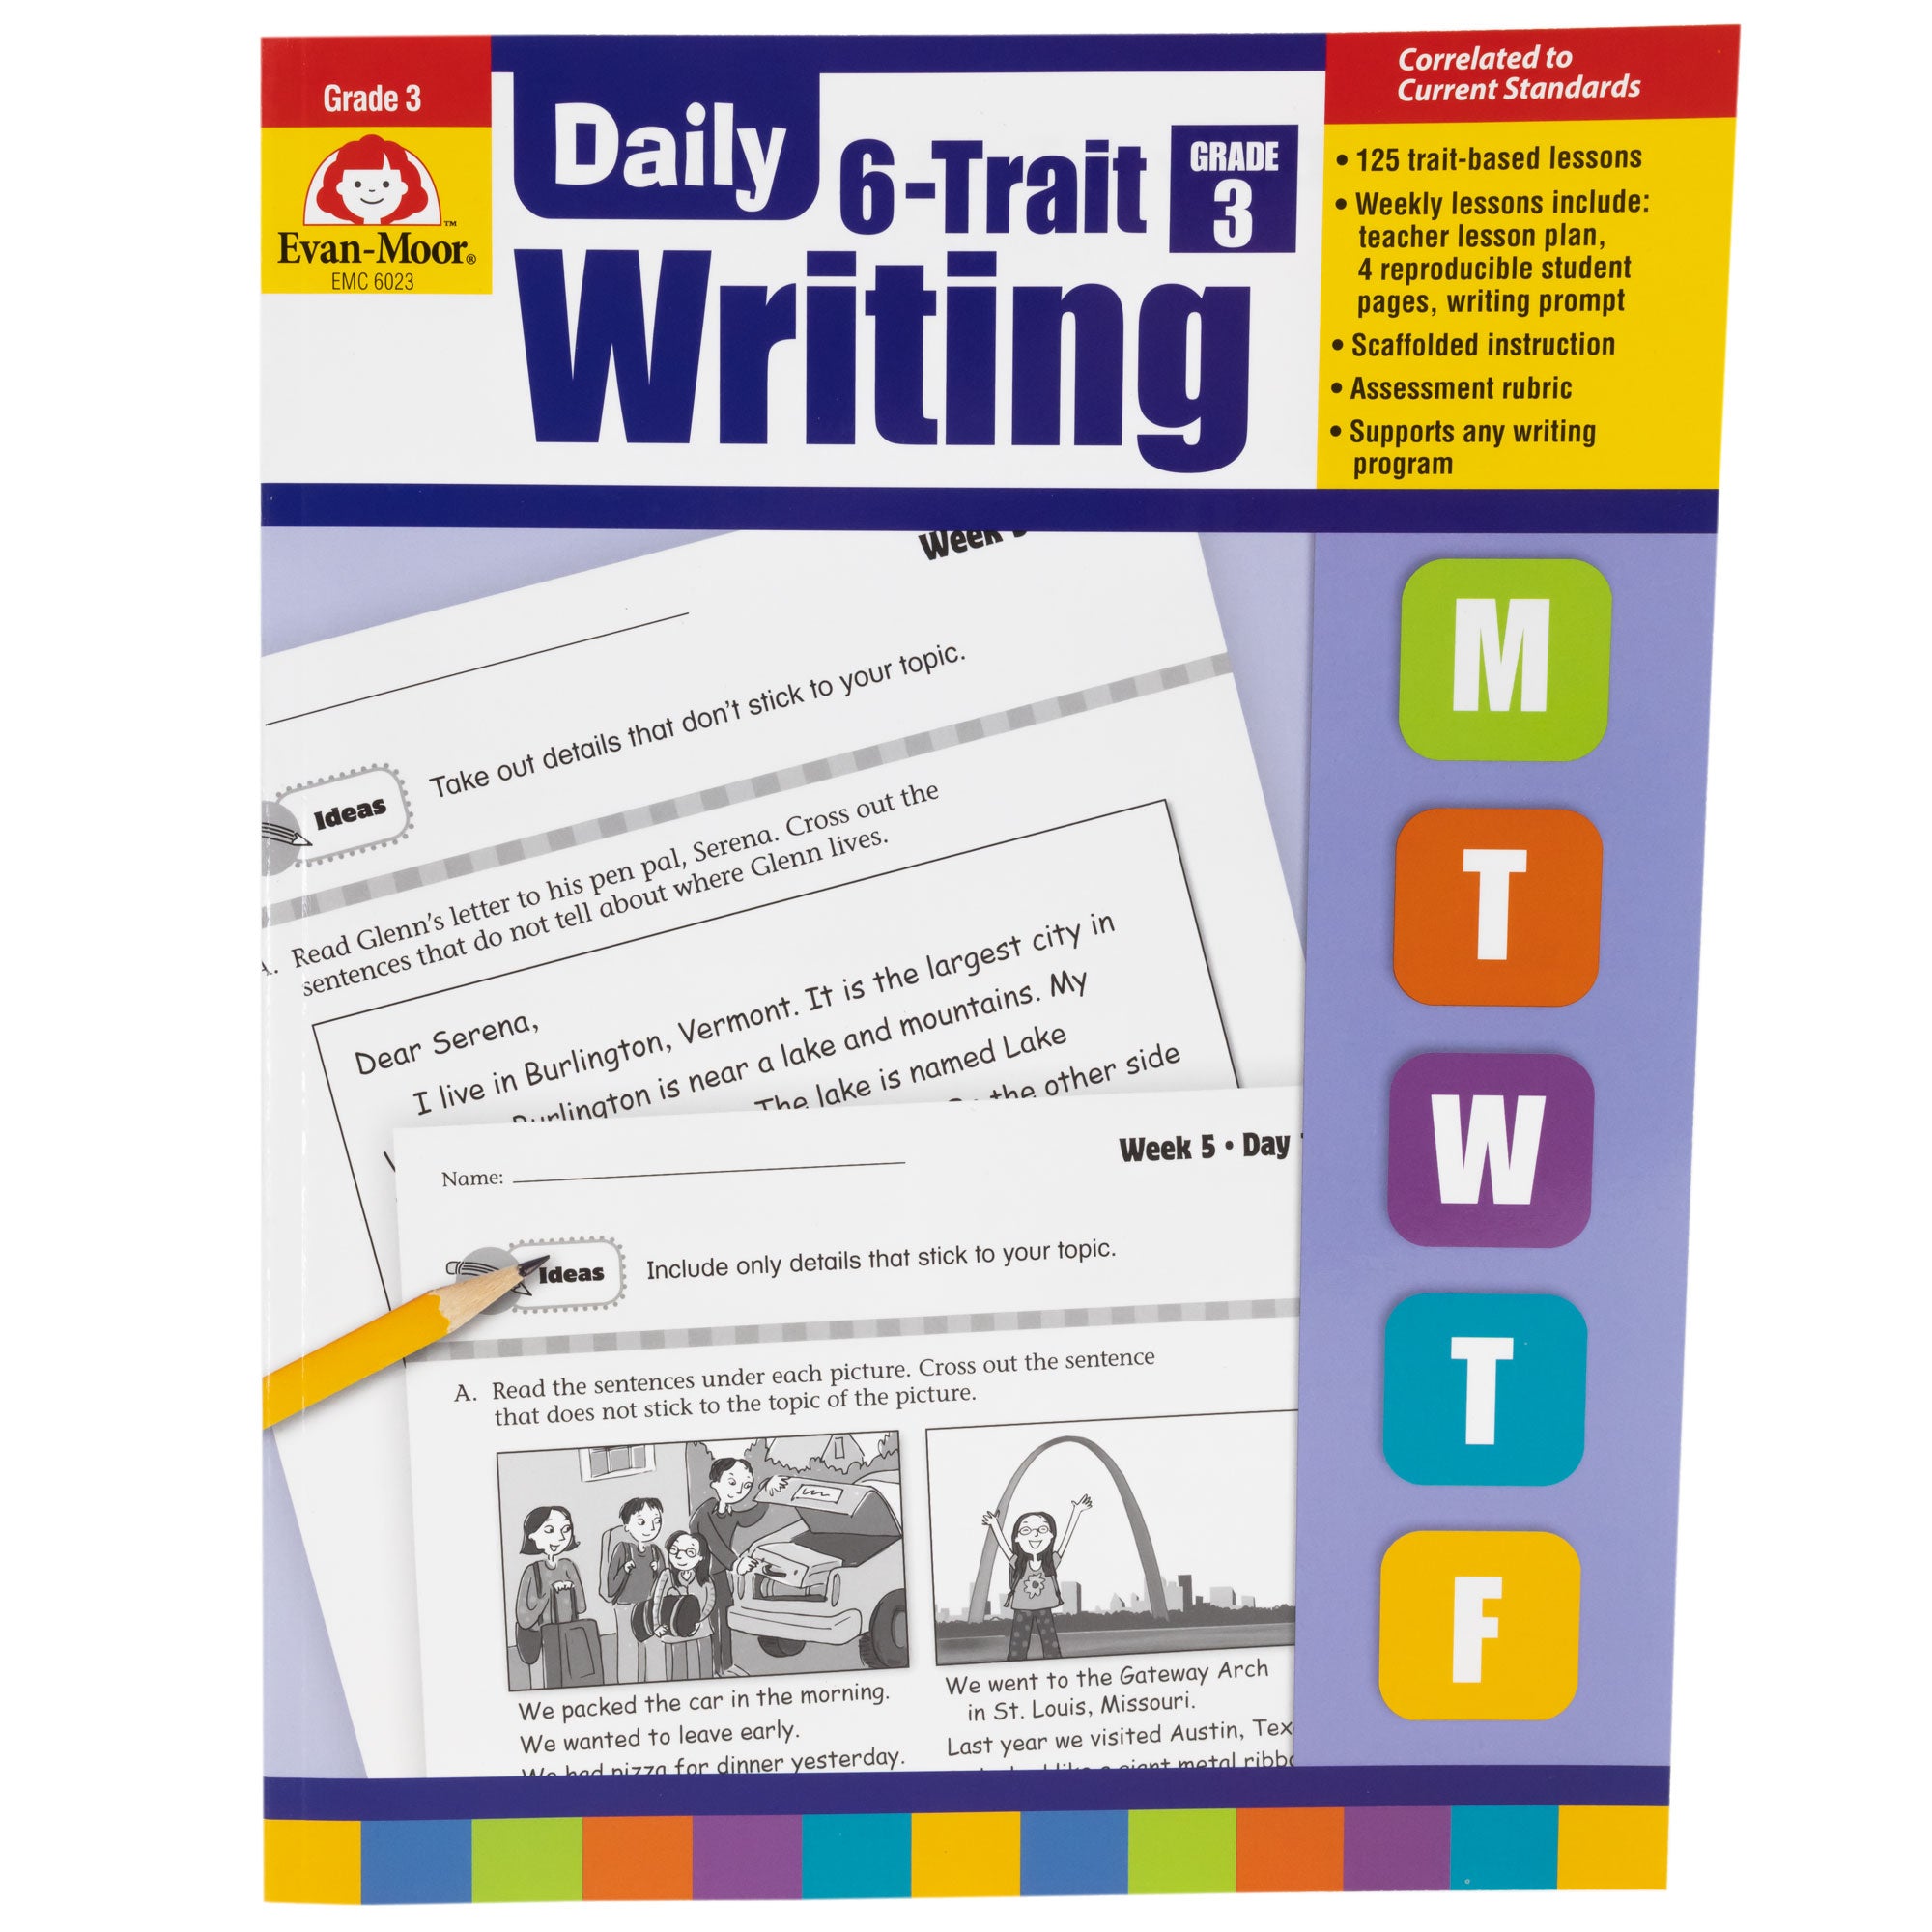 Daily 6 Trait Writing Grade 3 book. The background is white at the top, purple in the middle, and has a border at the bottom with many colored rectangles. There are colored squares off to the right with a letter in each square, including; M, T, W, T, F. There are 2 sample pages in the middle that show writing activities and illustrations.